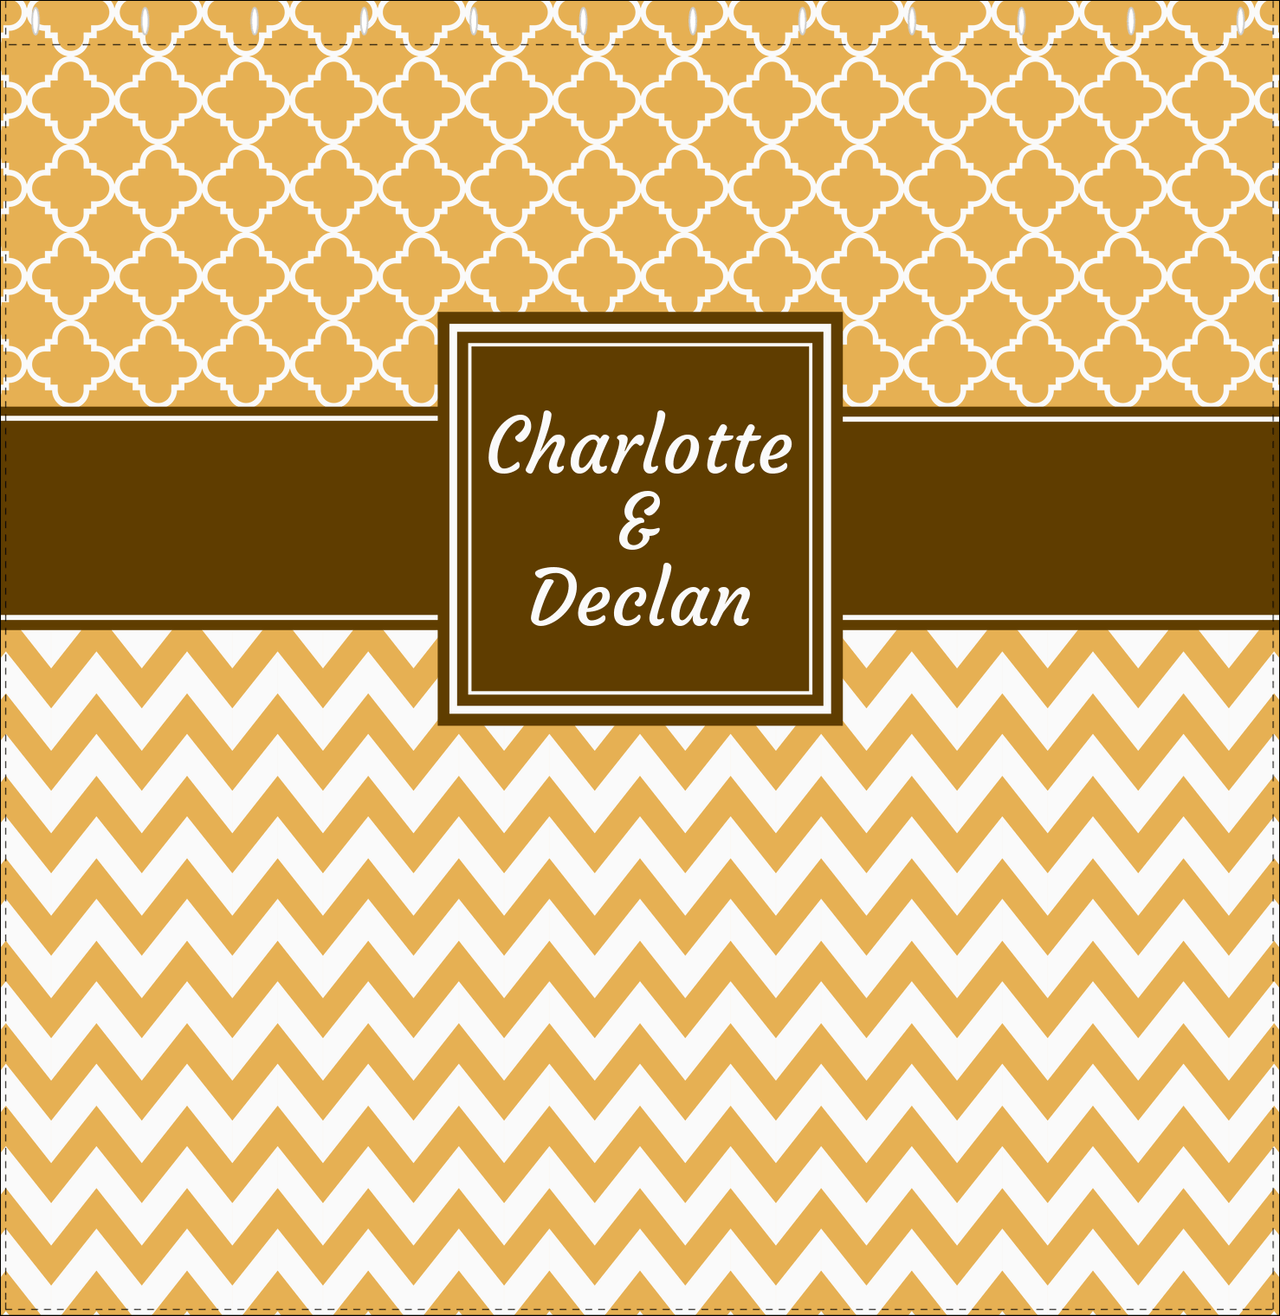 Personalized Quatrefoil and Chevron III Shower Curtain - Gold and Brown - Square Nameplate - Decorate View